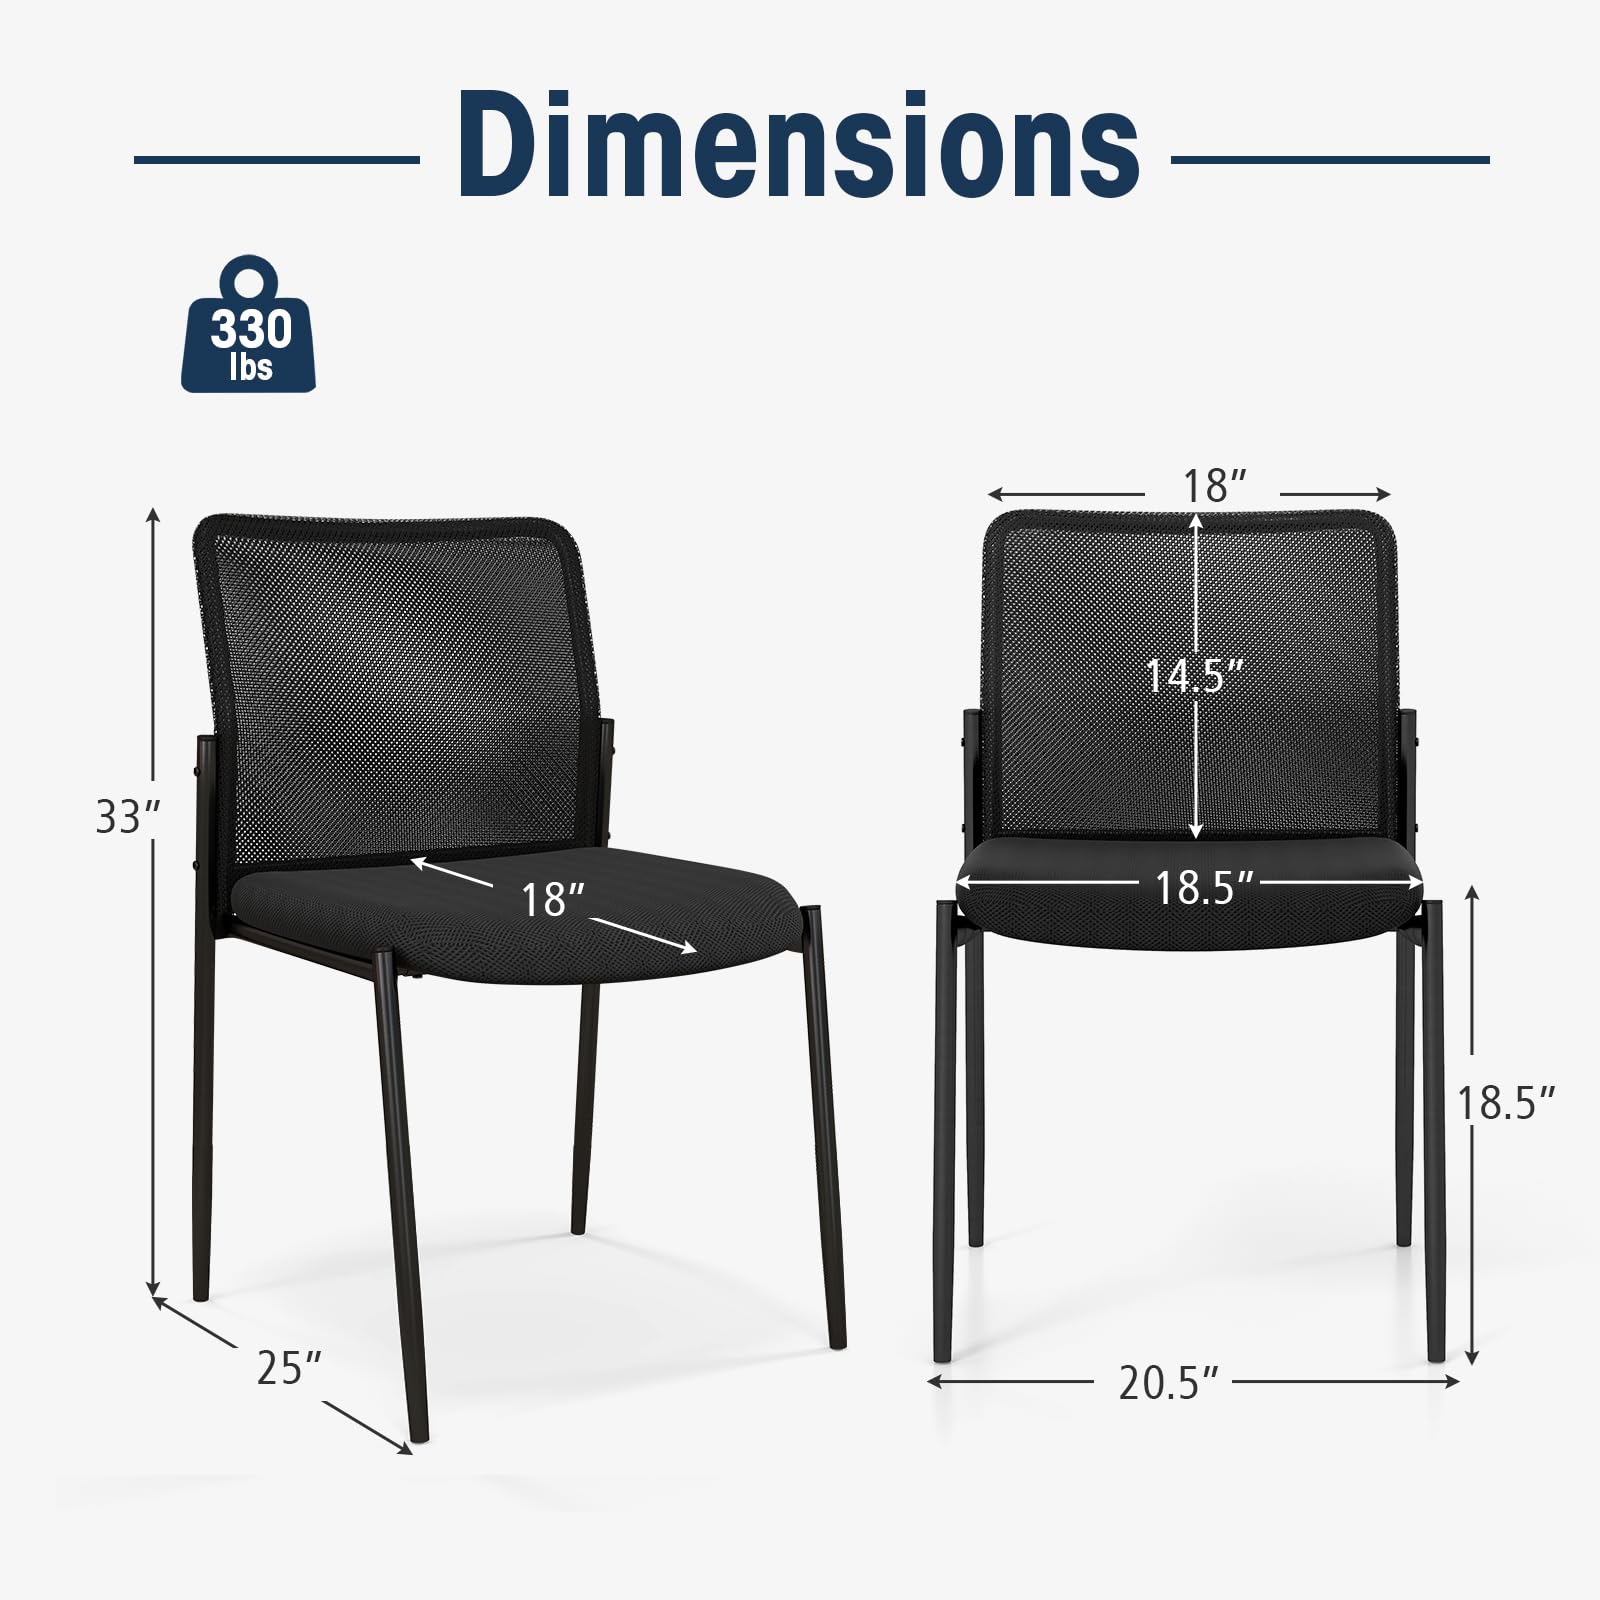 Giantex Waiting Room Chairs - Stackable Guest Chairs w/Ergonomic Backrest